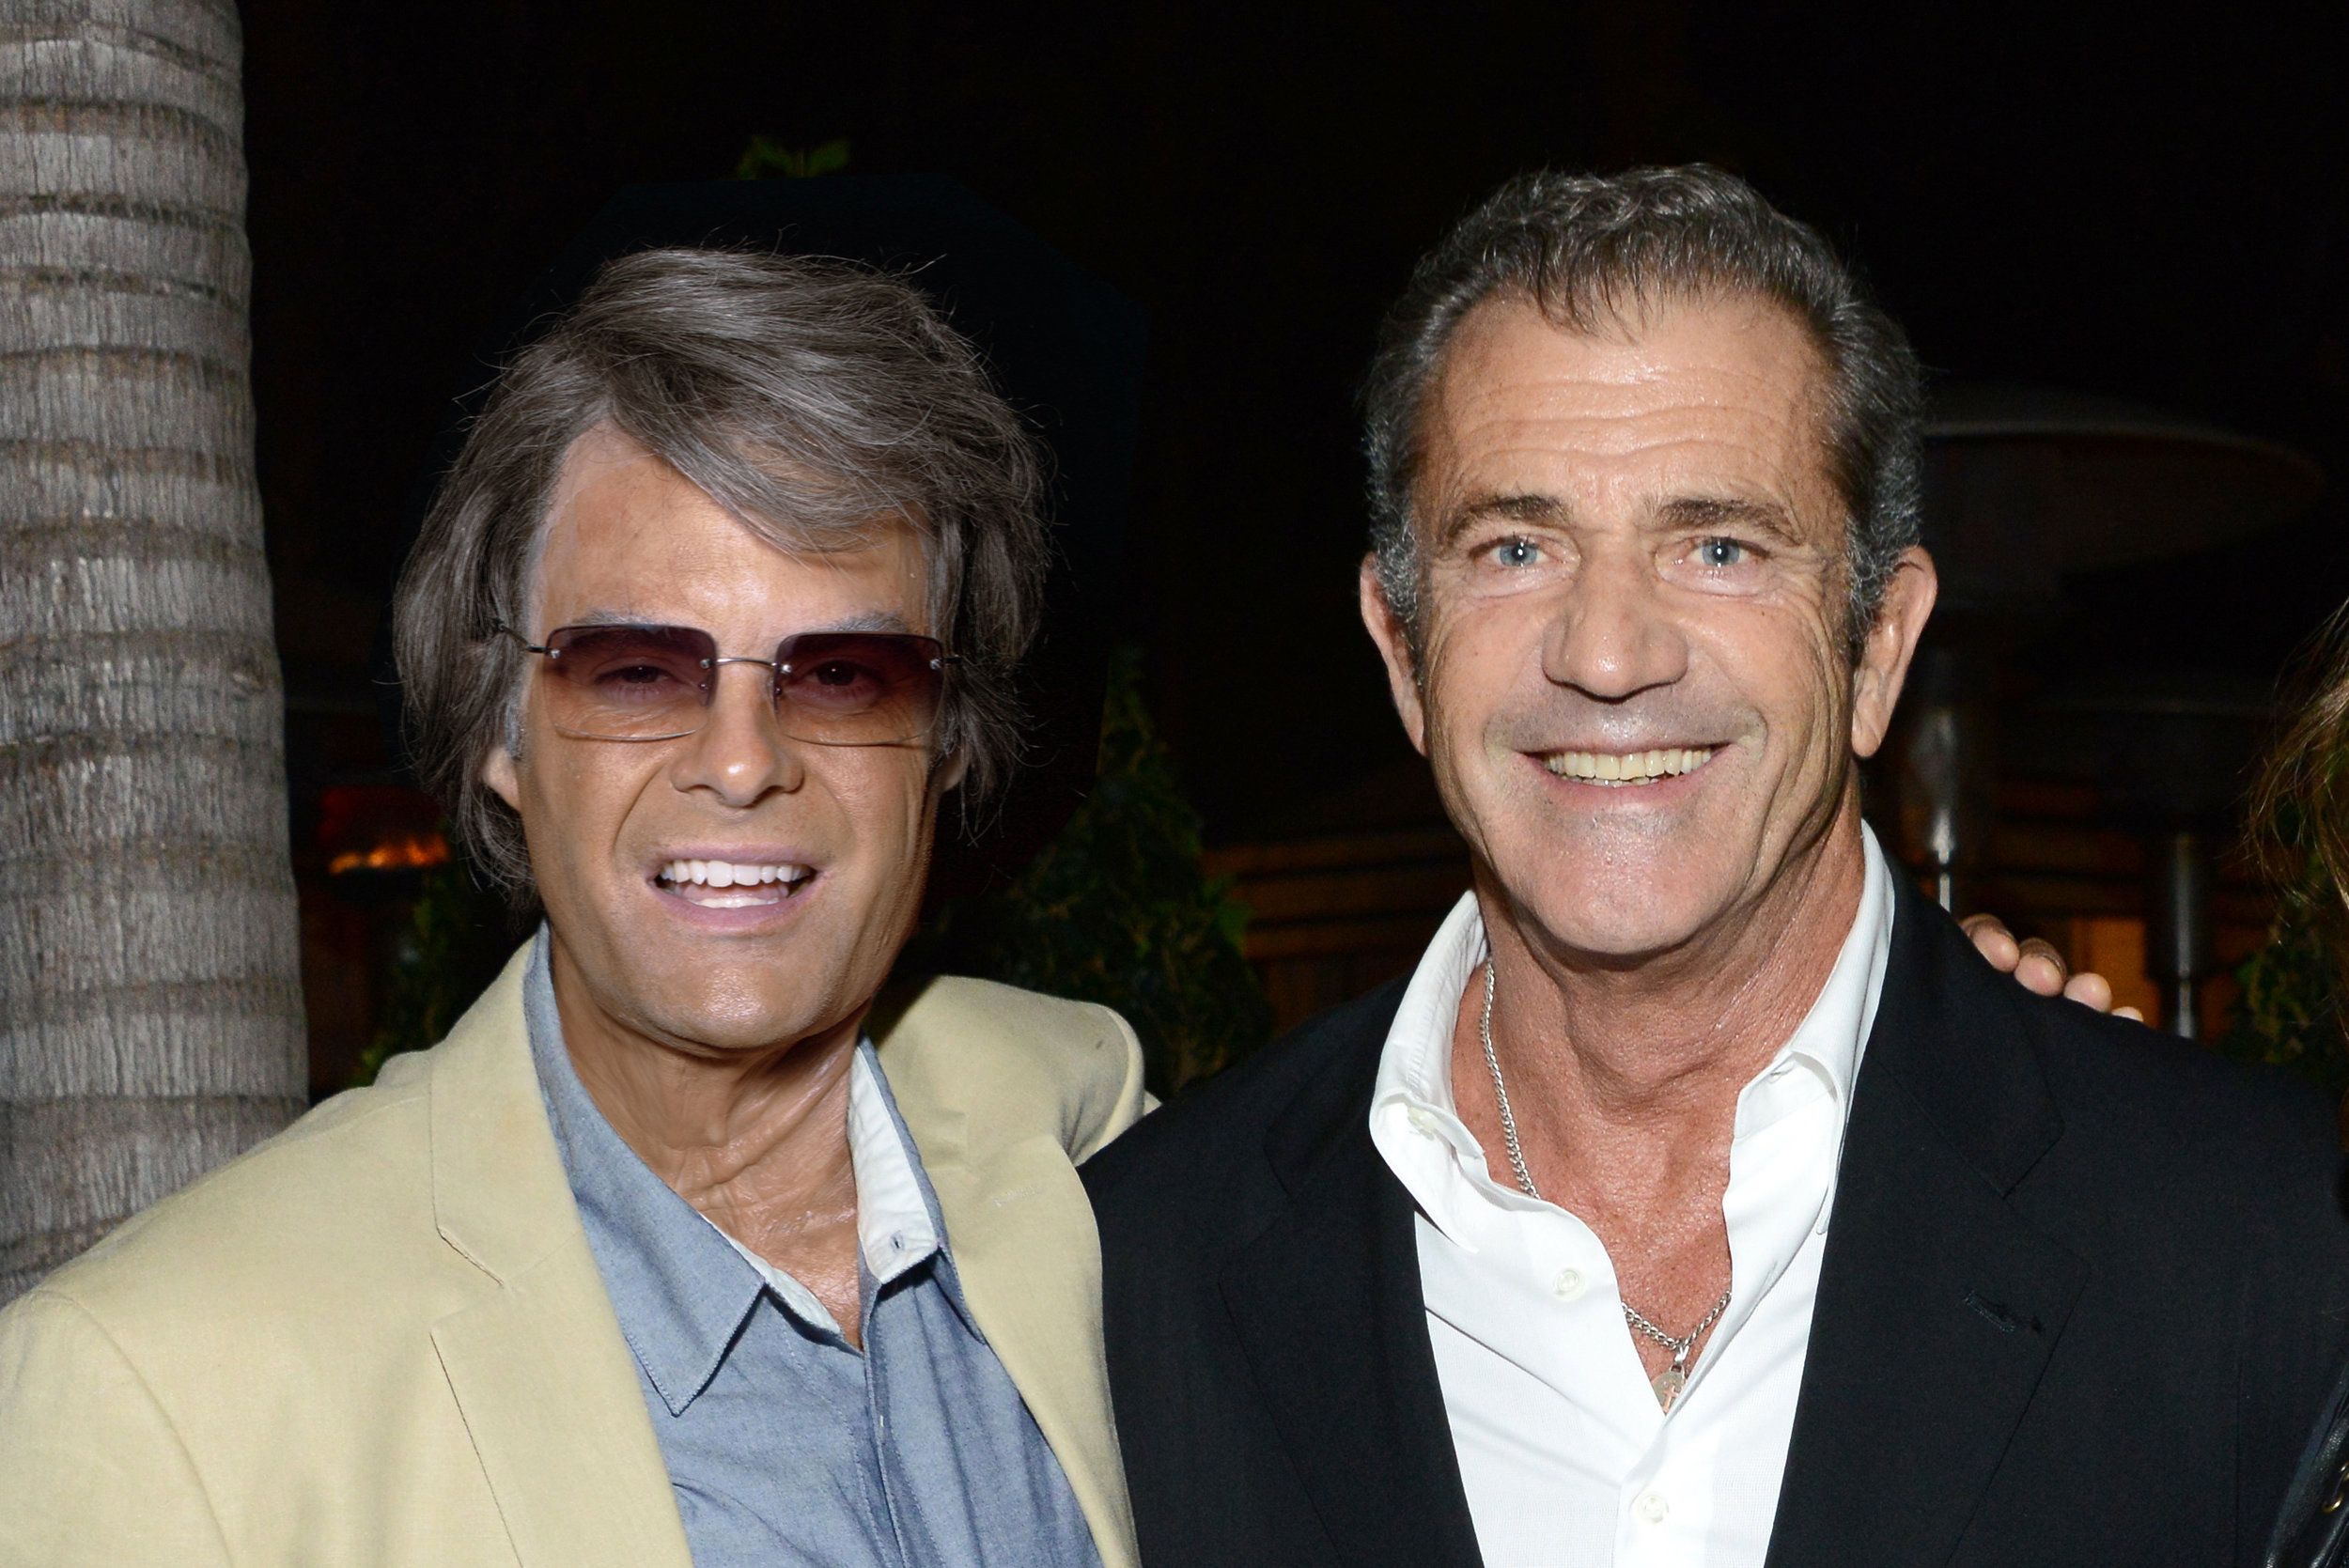 Jerry with Mel Gibson  [Photo Composite]